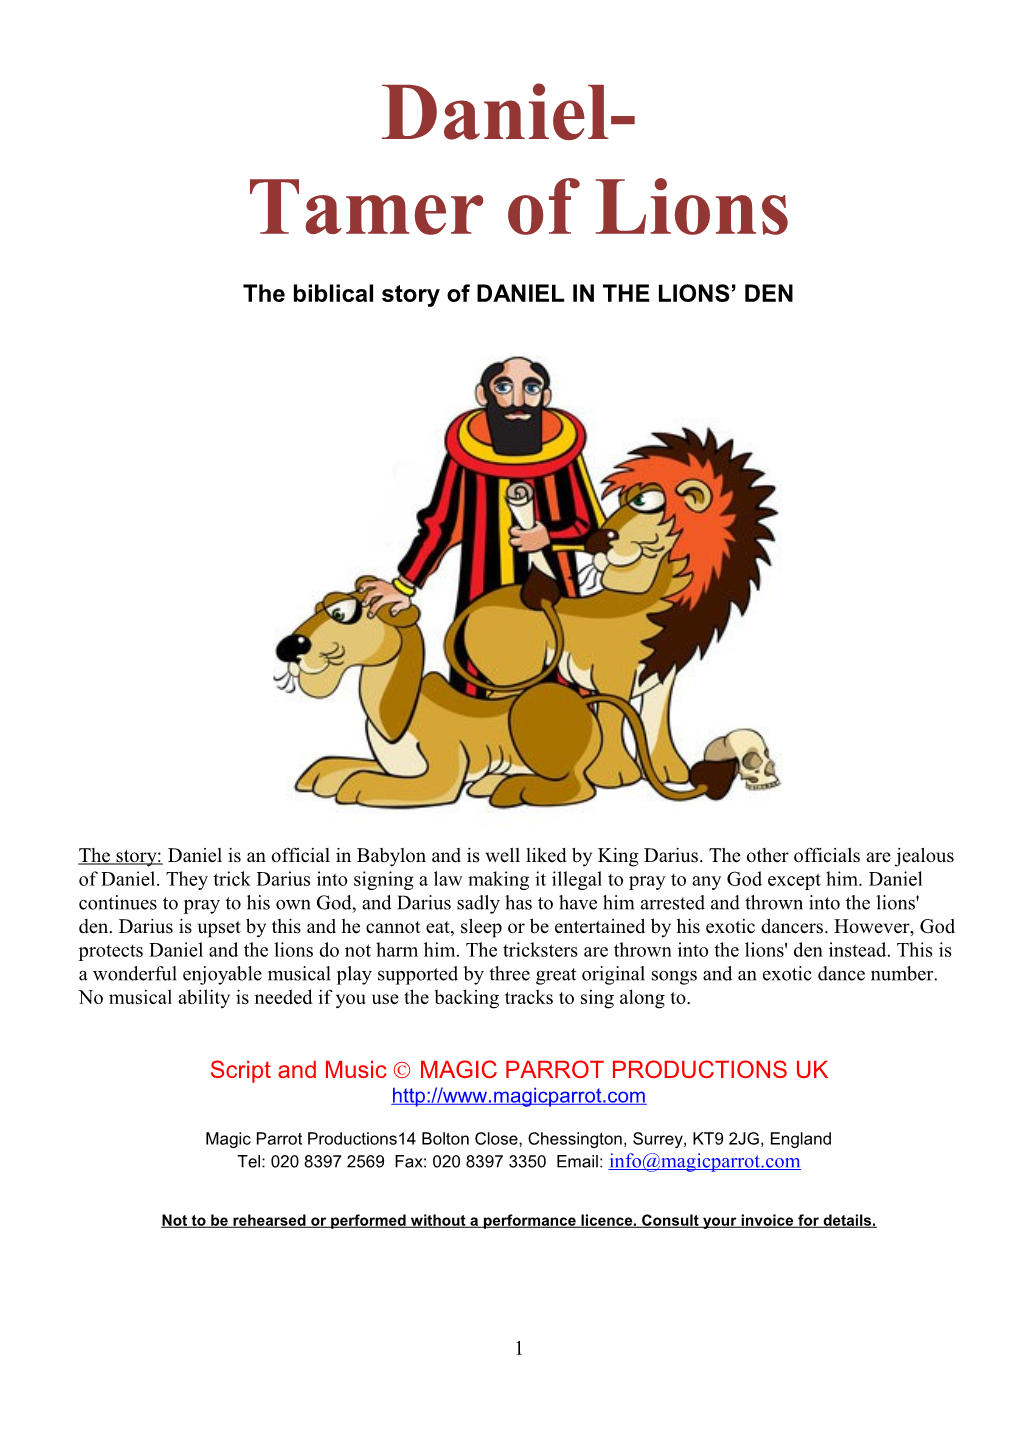 The Biblical Story of DANIEL in the LIONS DEN